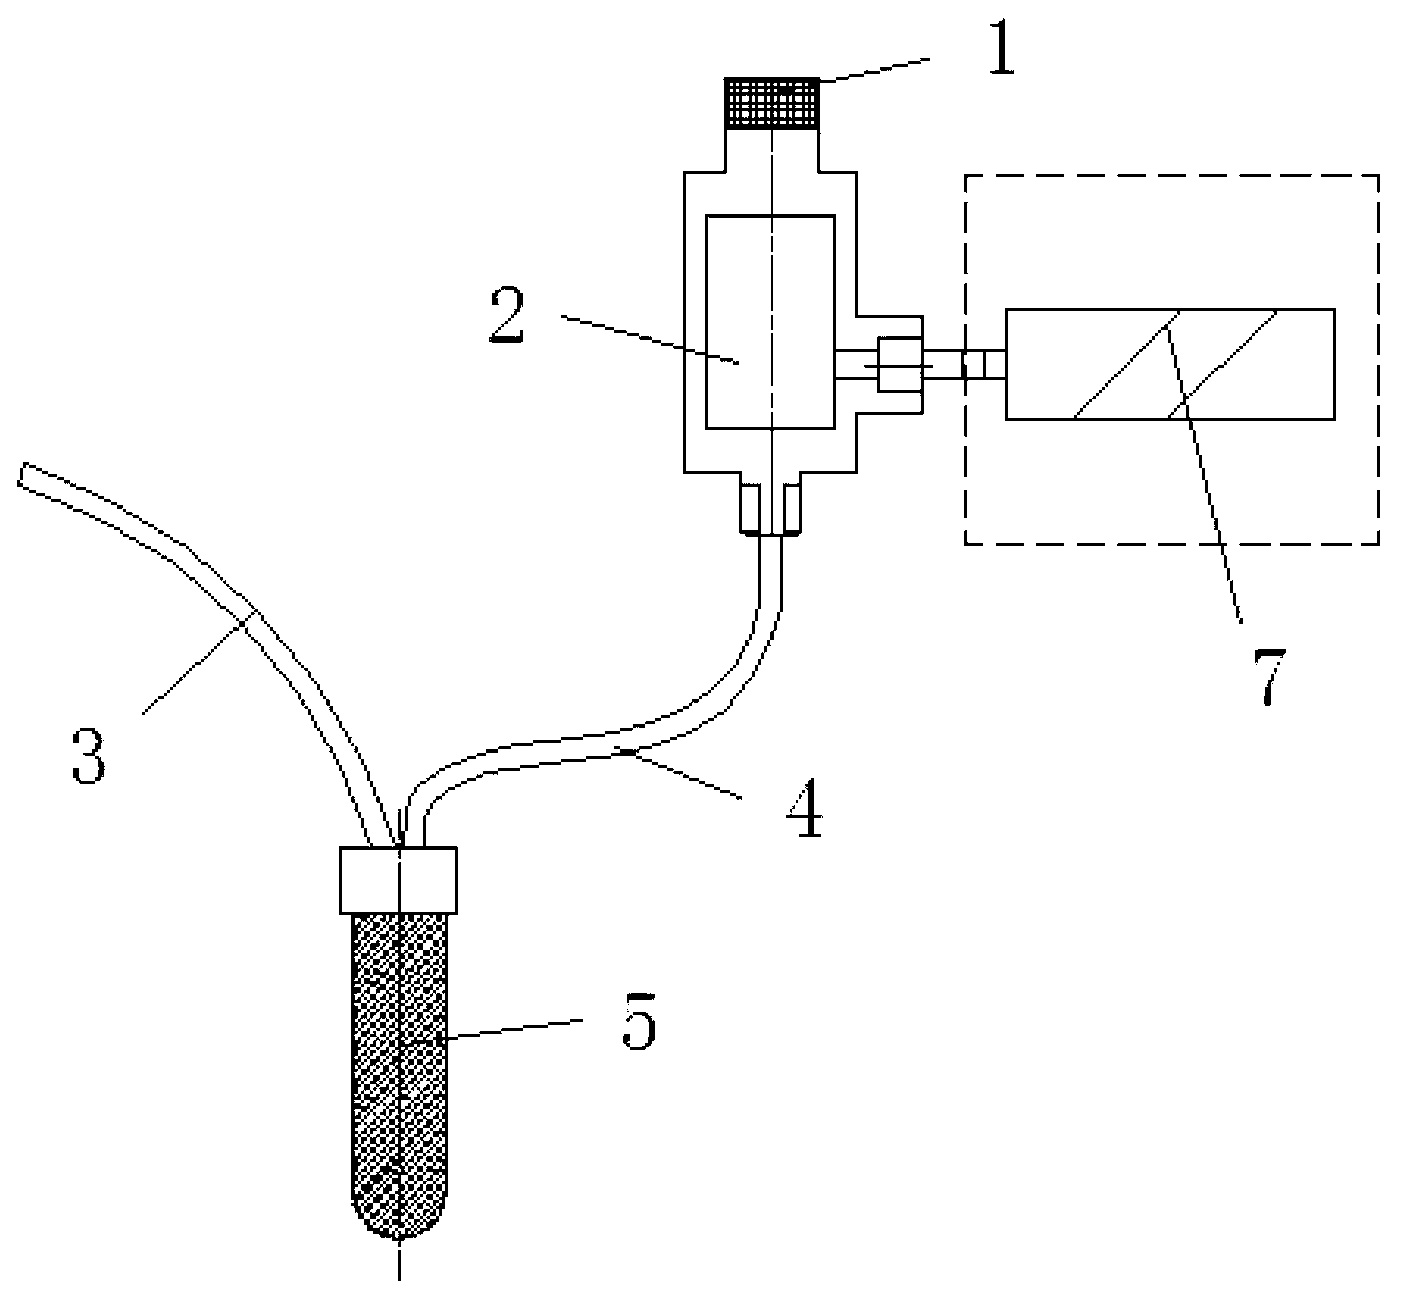 Split-type tensionmeter connected through soft pipes and used for measuring soil water potential